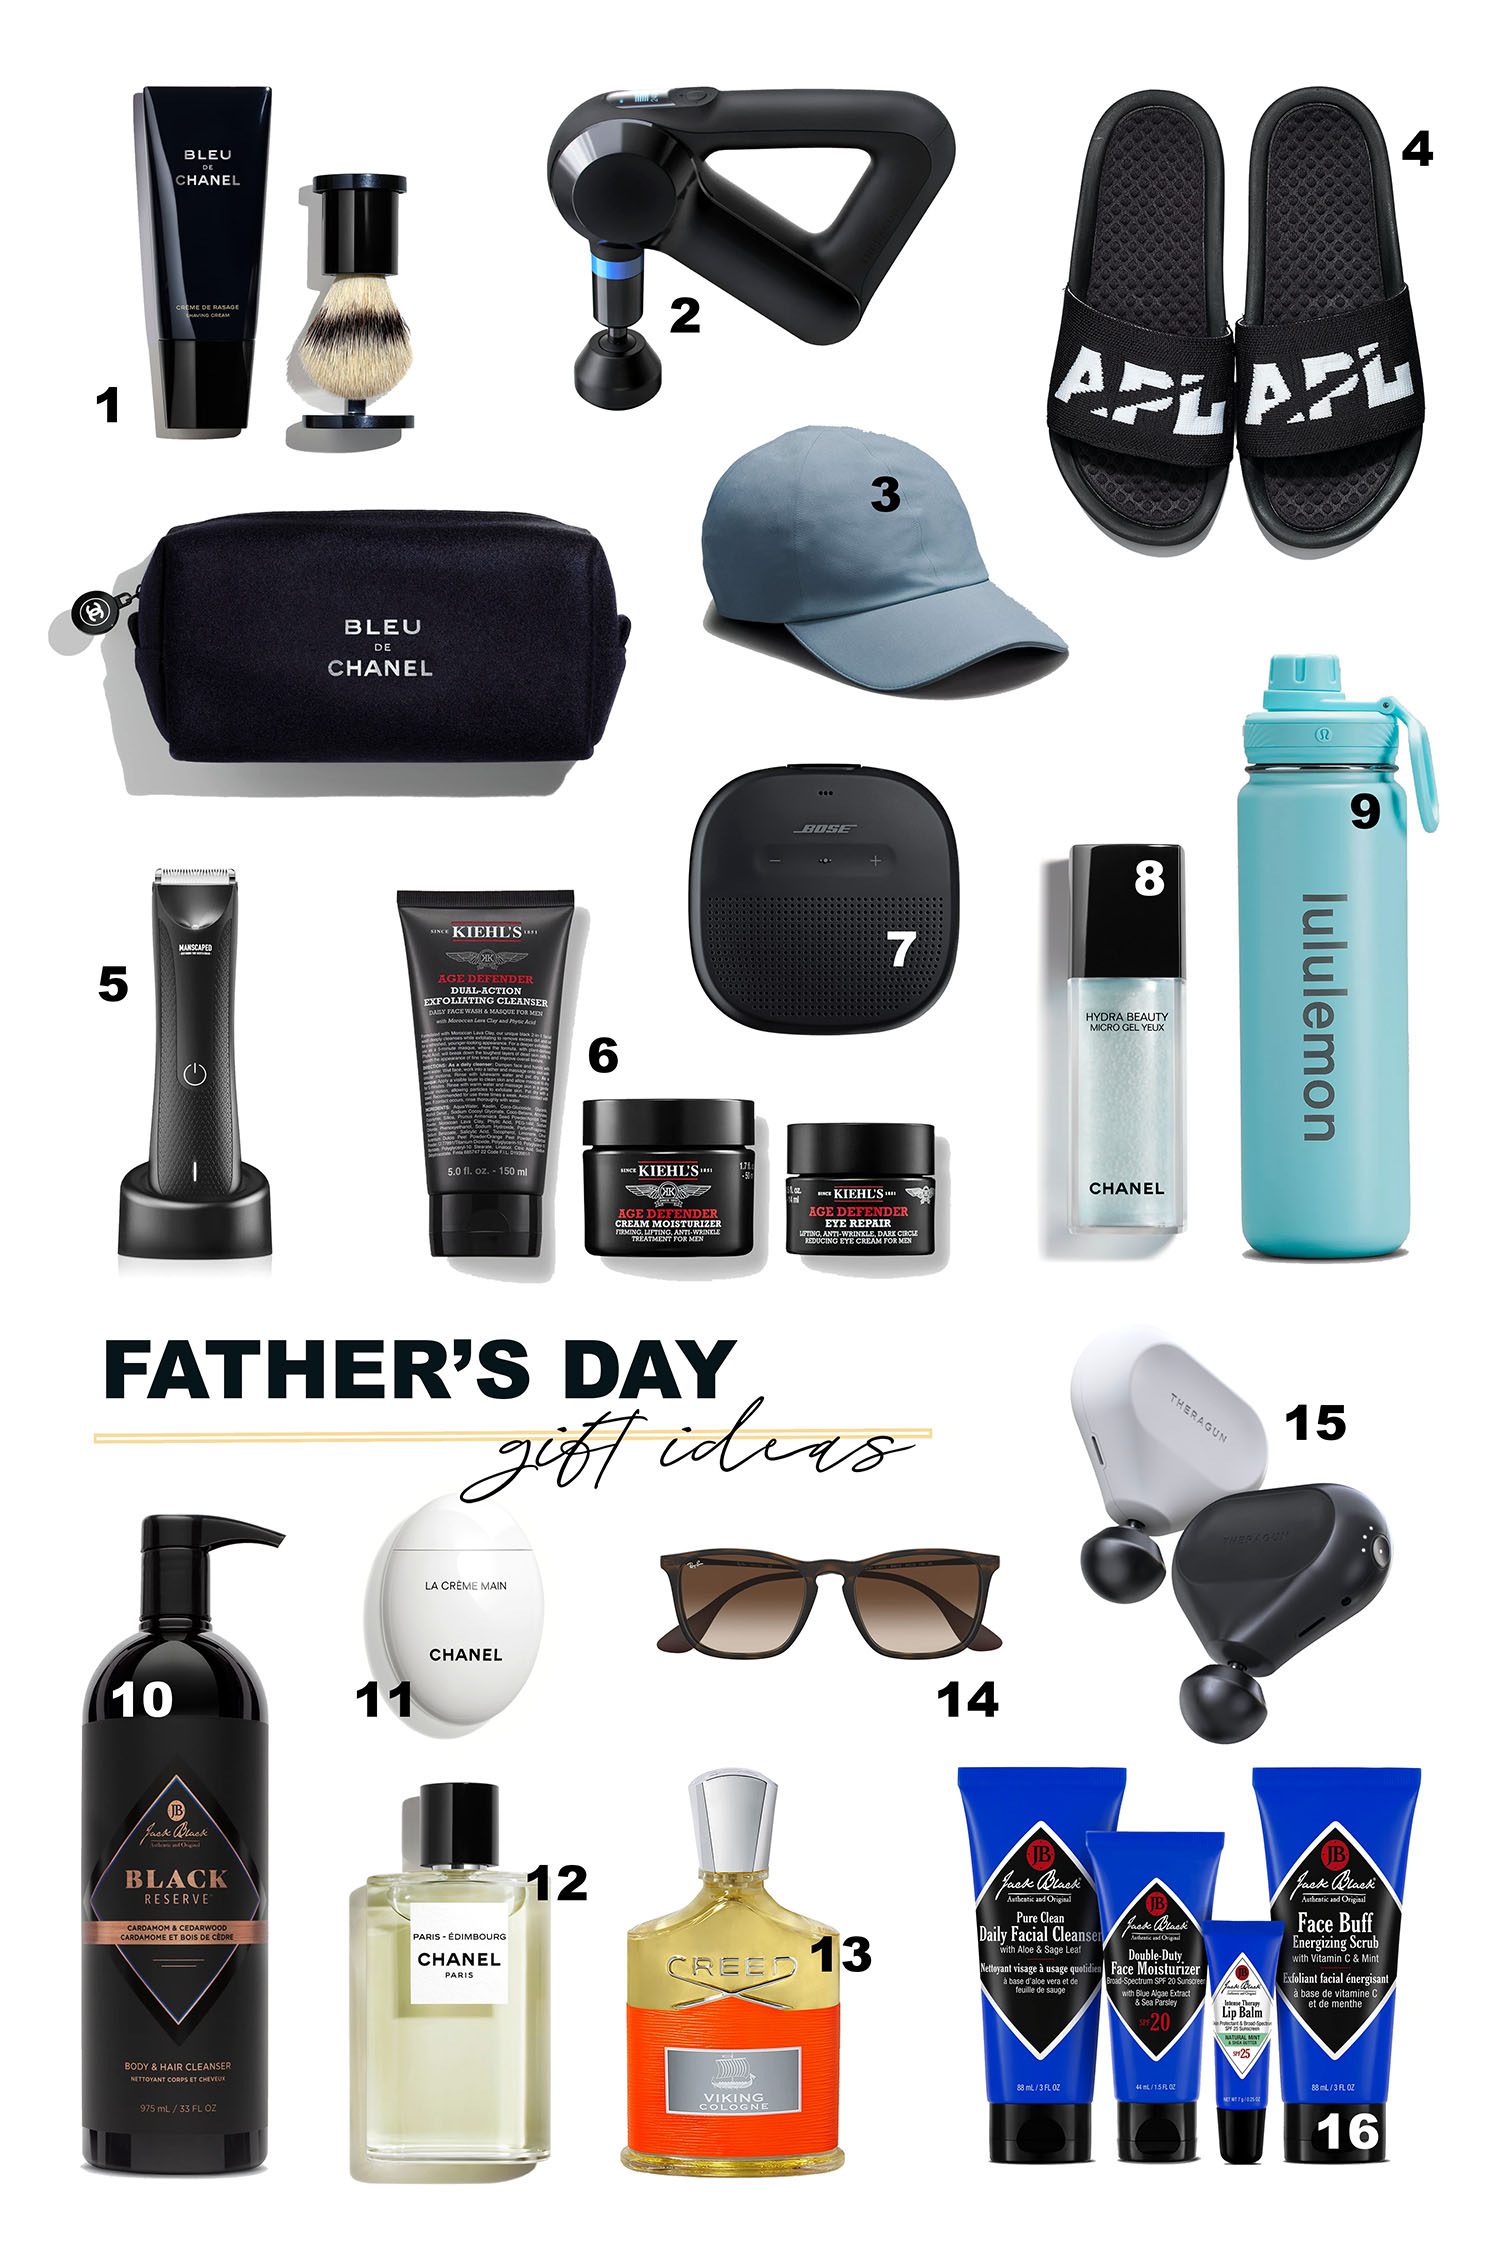 Useful Gifts for Men - Grooming and On-the-Go Gift Ideas